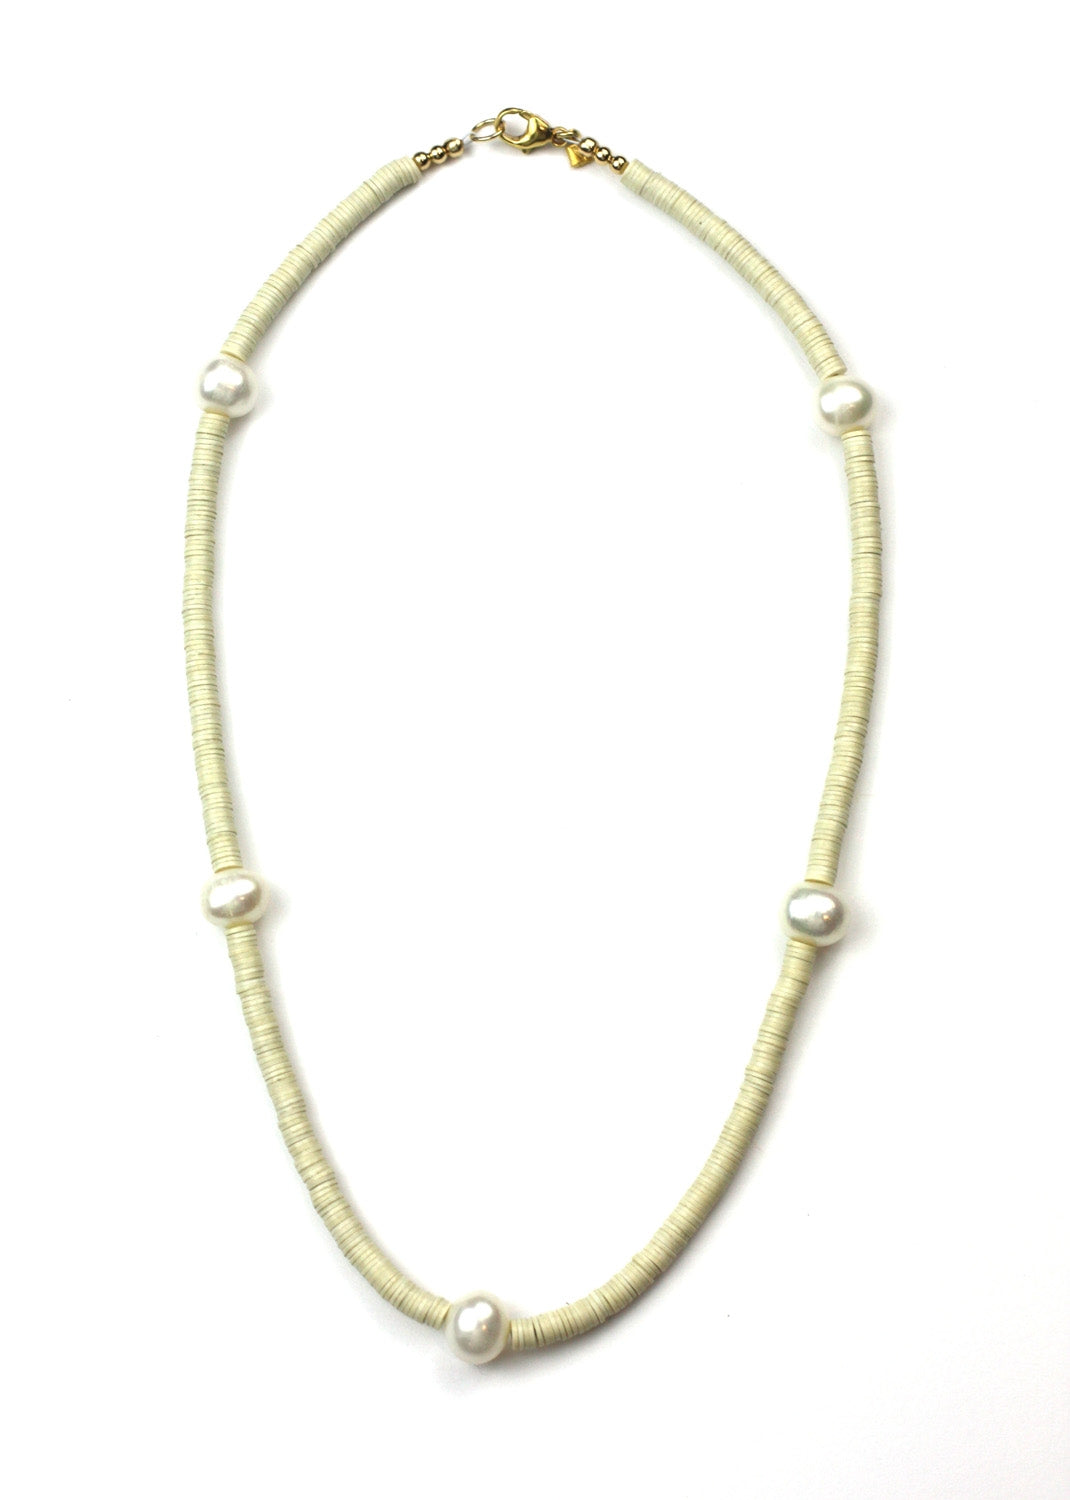 4mm Bone & Pearl Necklace